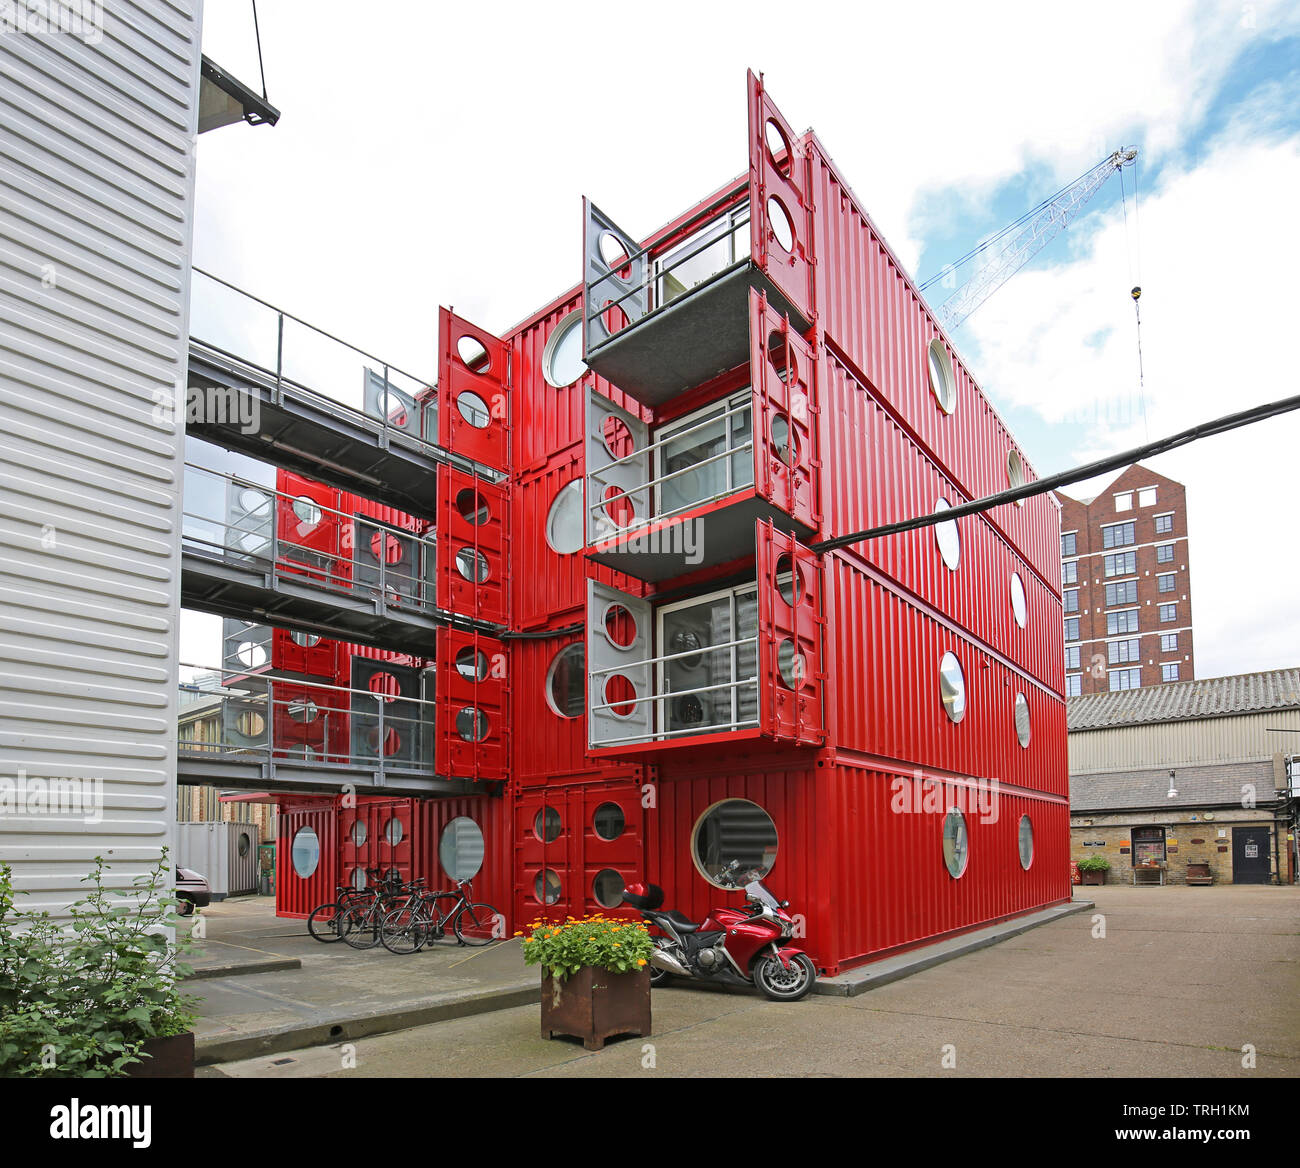 Container City 1 at Trinity Buoy Wharf, London, UK. A collection of live/work spaces constructed from stacked shipping containers. Stock Photo